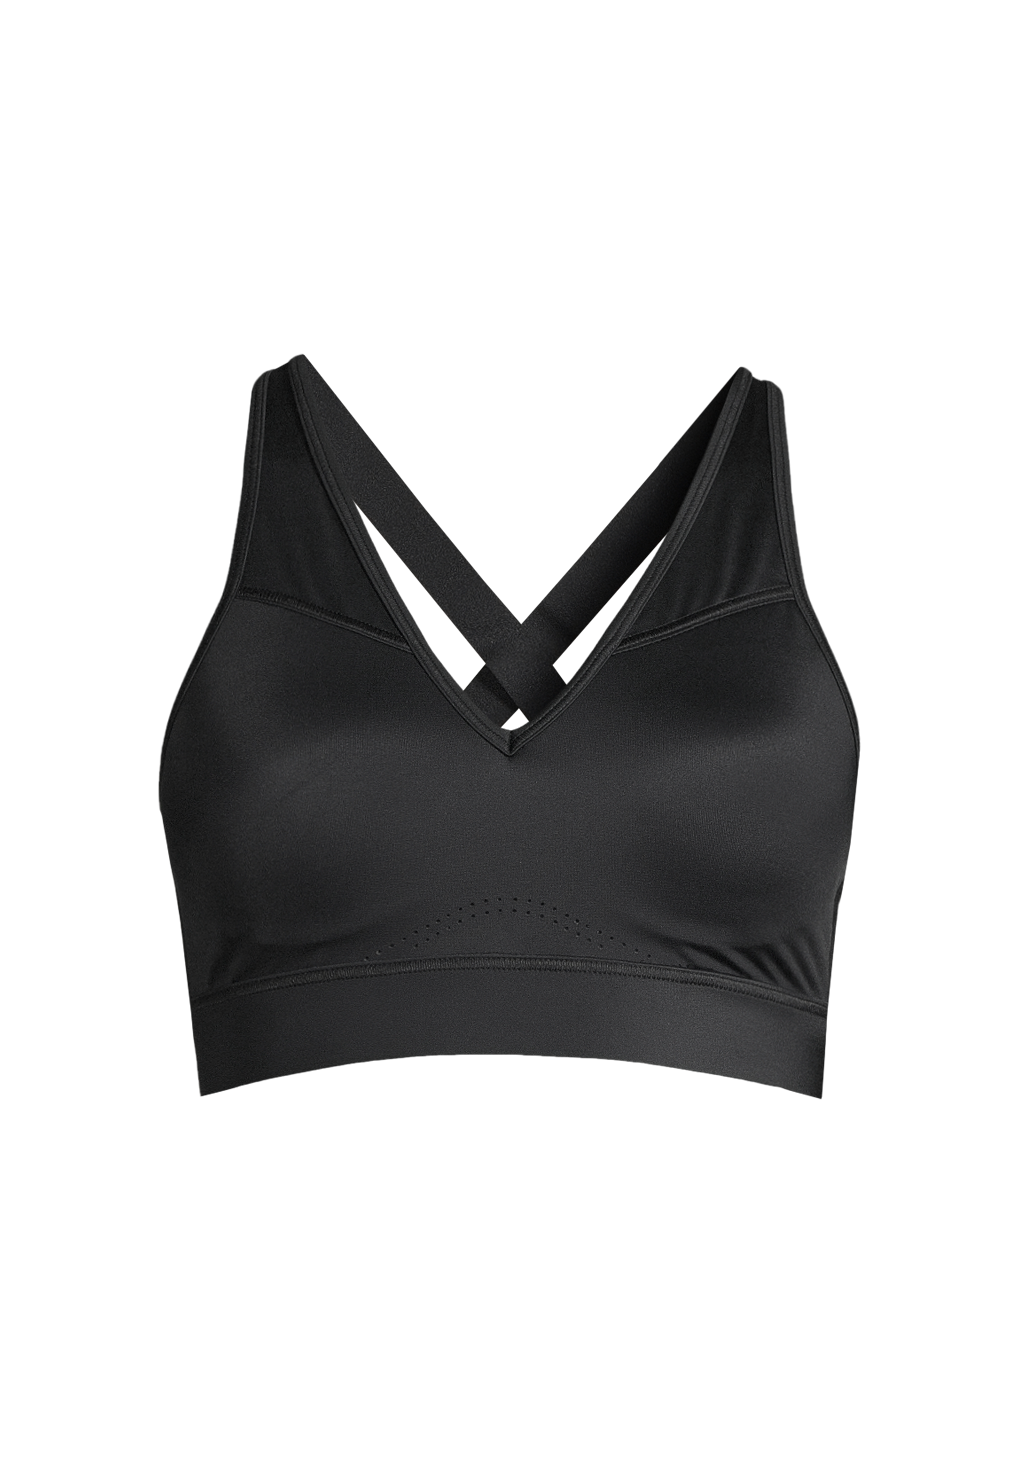 Double-sided brocade all-in-one sports bra non-displaceable anti-exposure  vest fixed cup sports fitness bra - Chrmplx Store